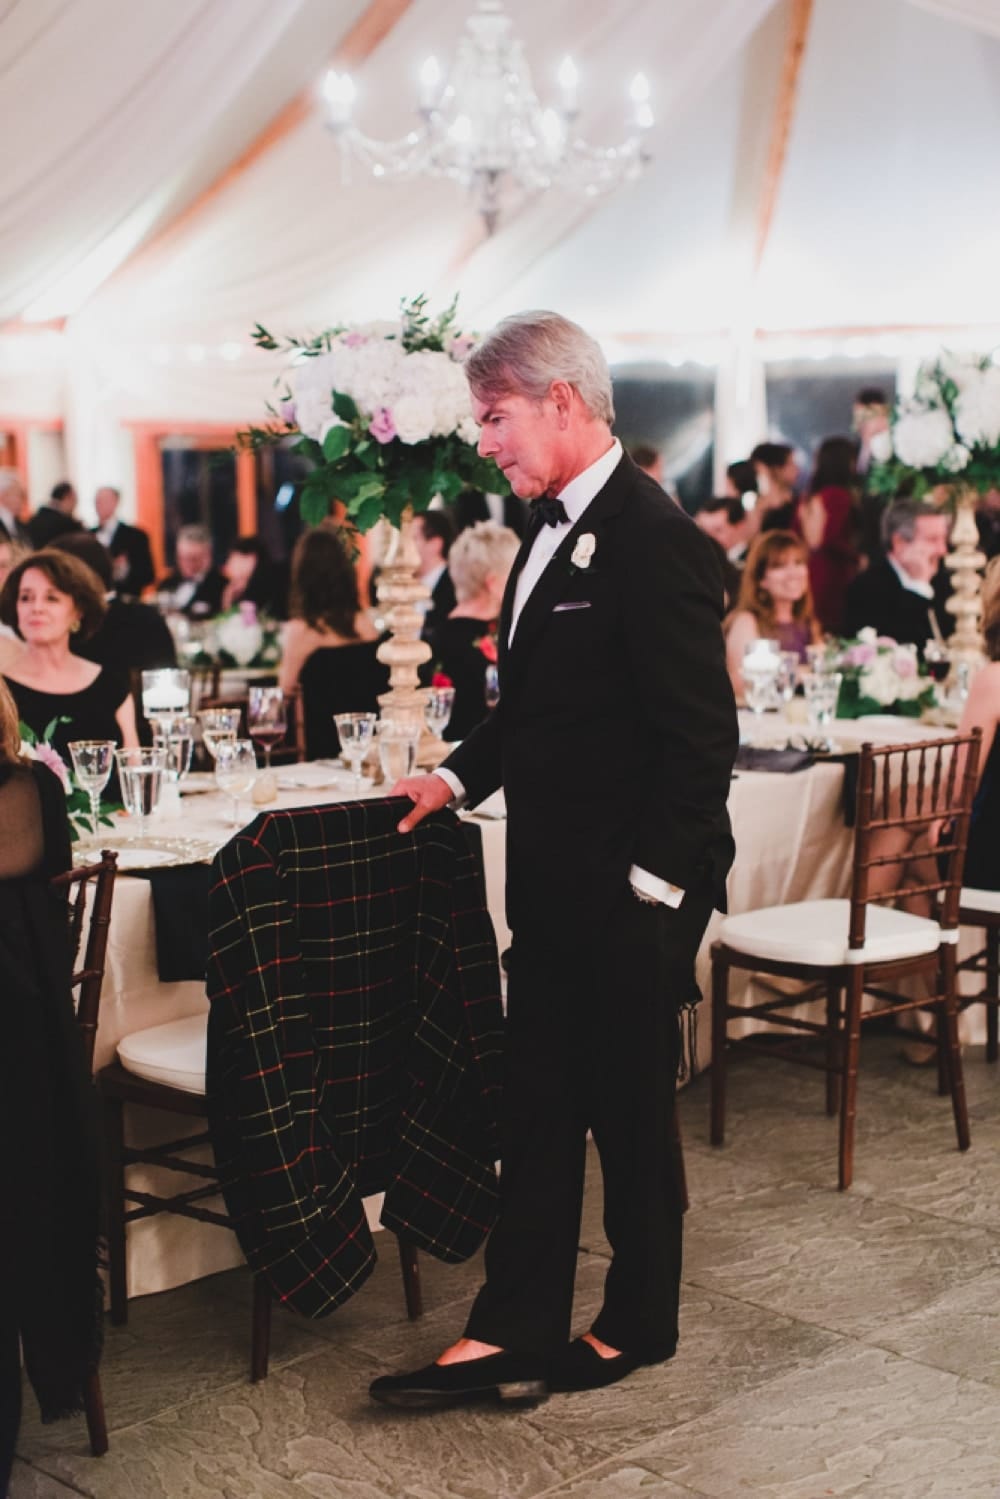 A candid photograph of the father of the groom during a wedding reception at the Castle Hill Inn in Newport, Rhode Island